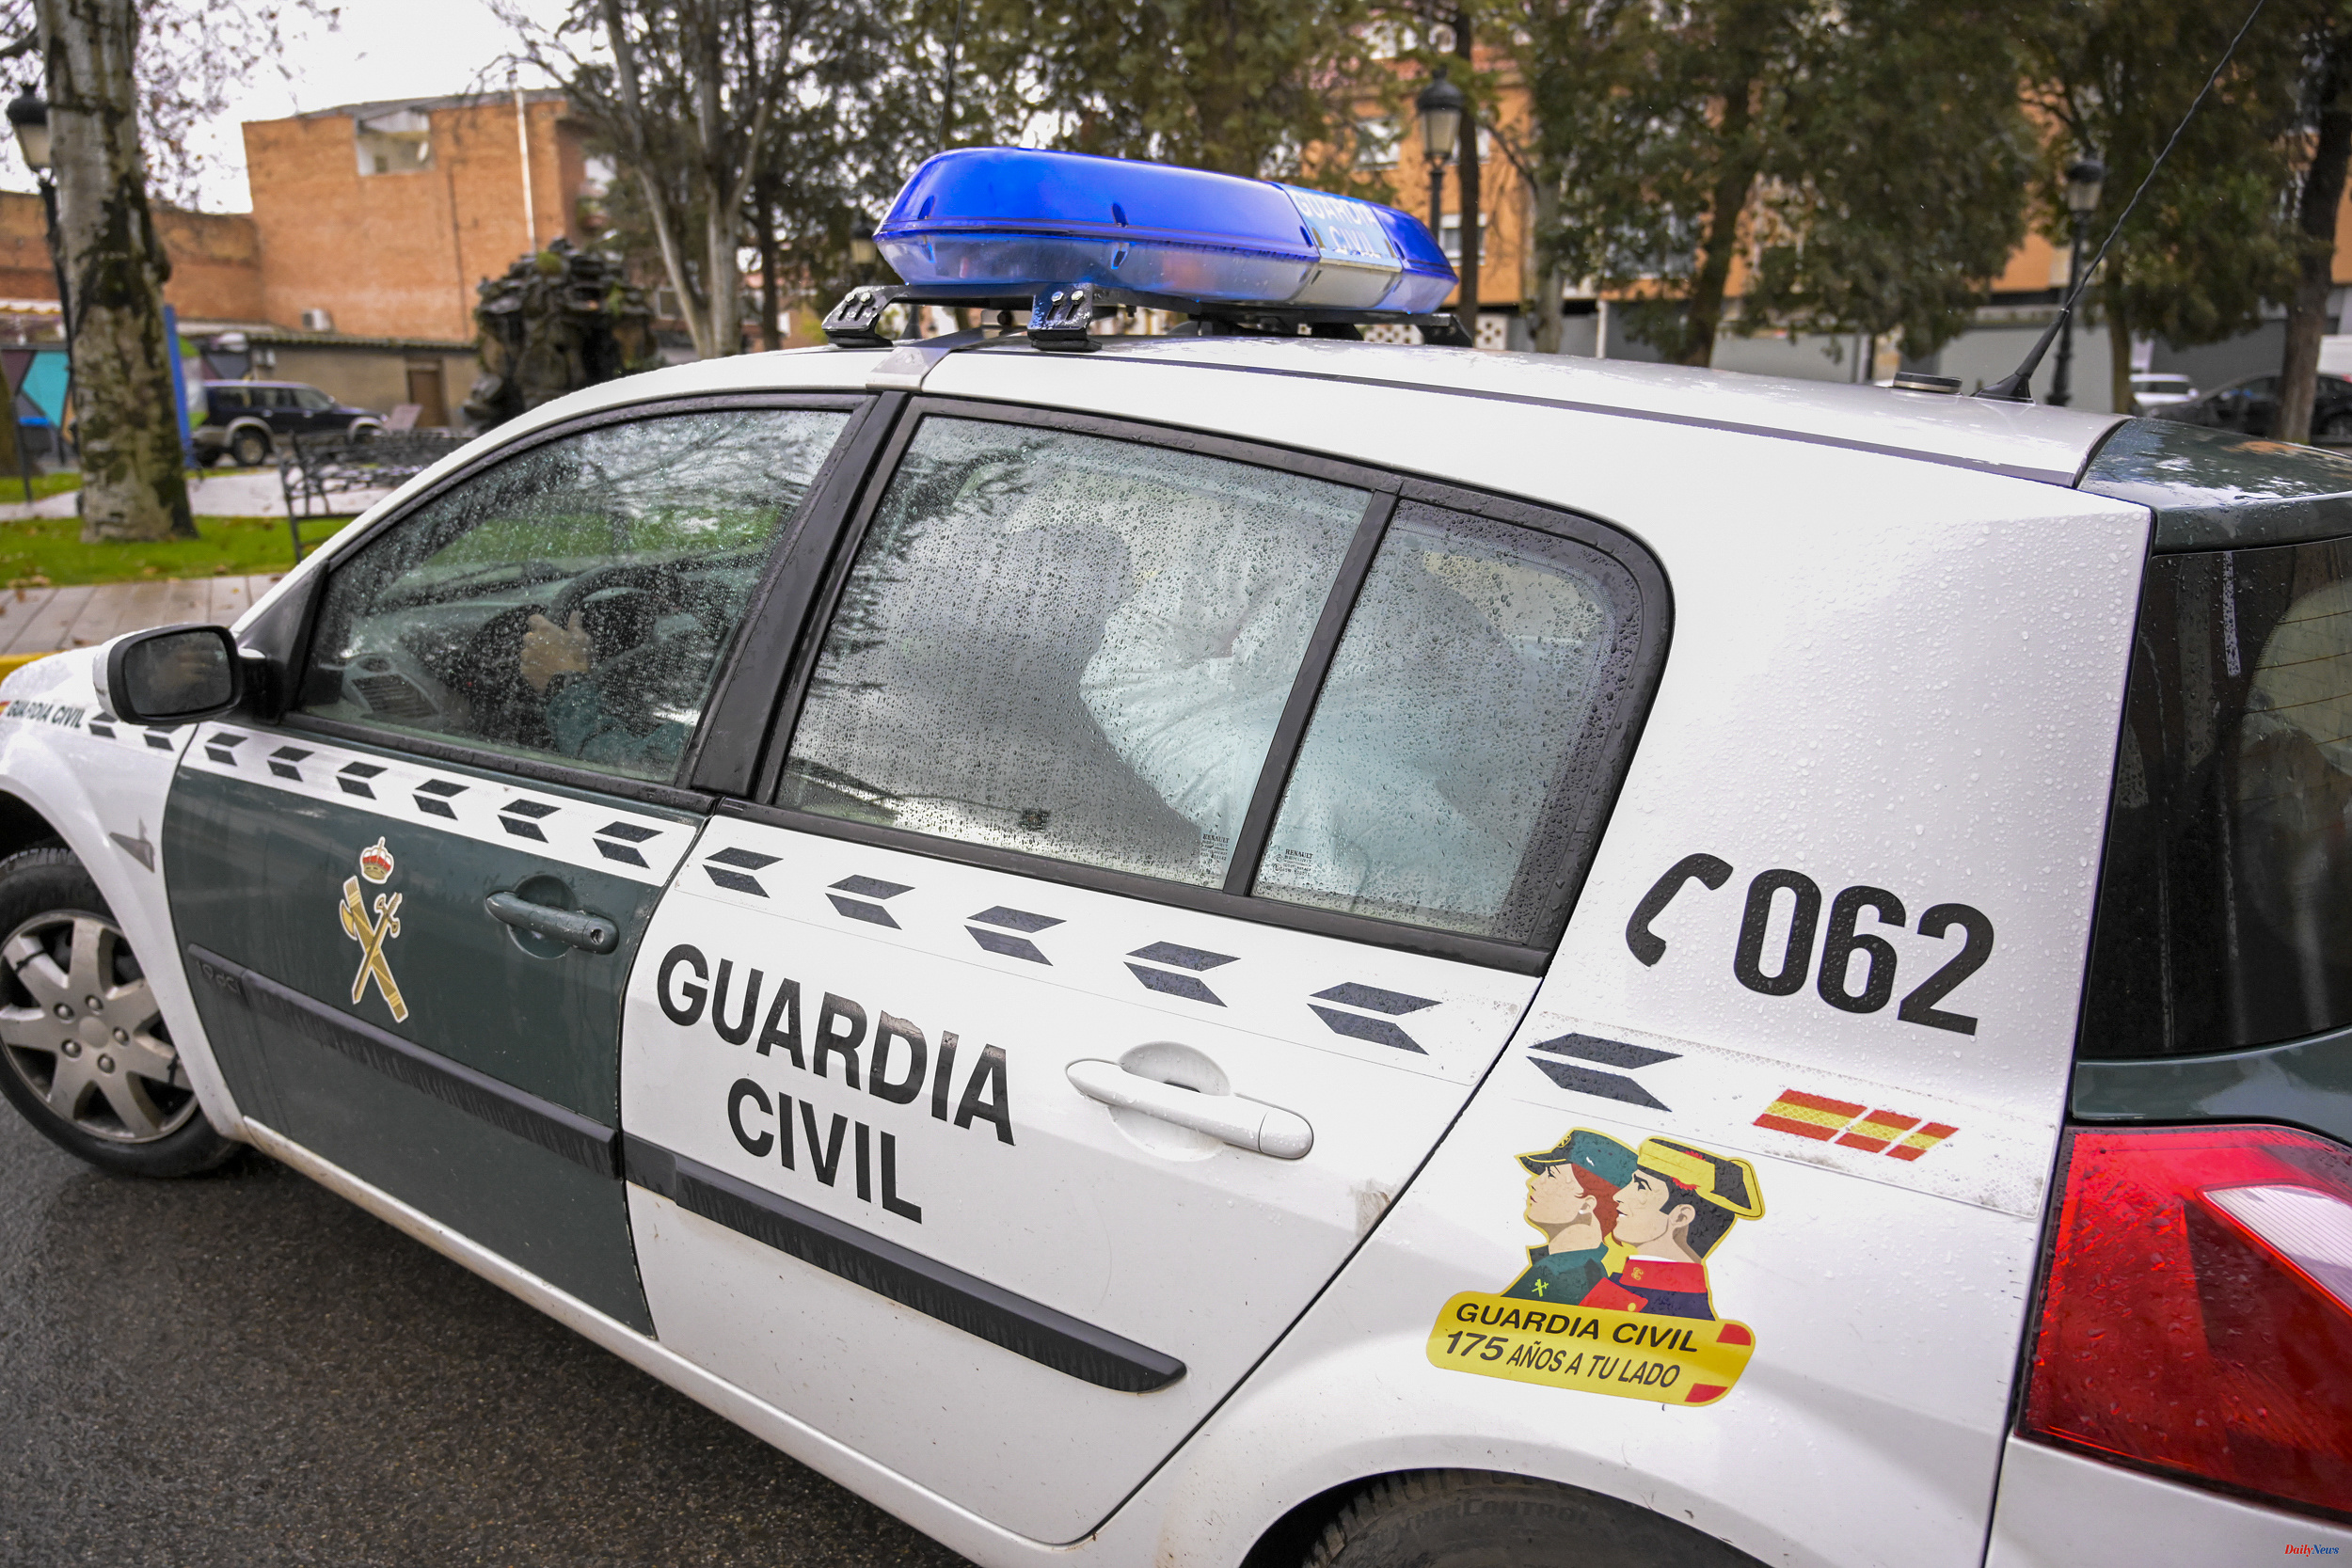 Murcia Arrested the alleged perpetrator of several sexual assaults on a minor in Murcia